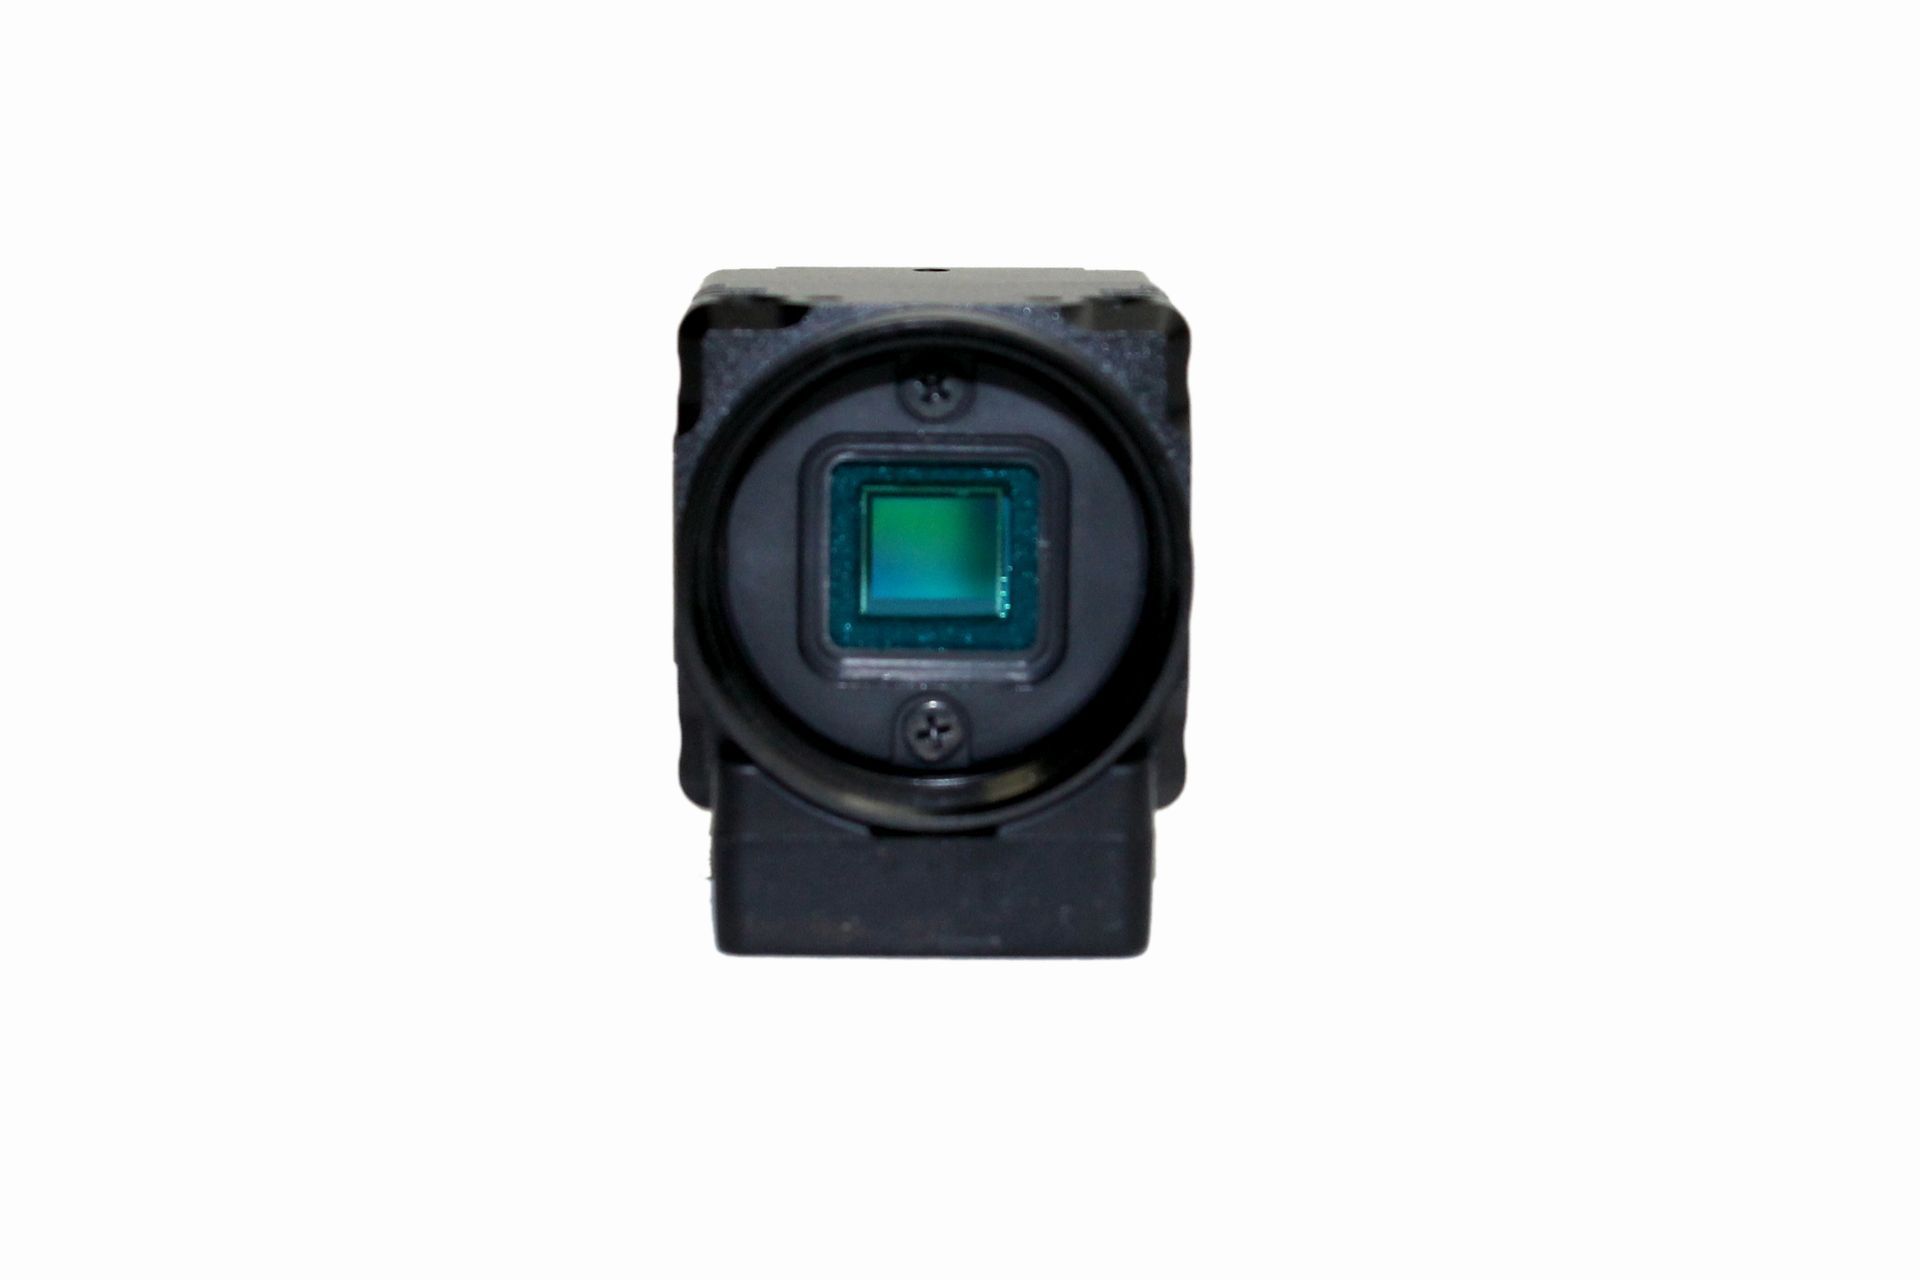 A black camera with a green square in the middle on a white background.